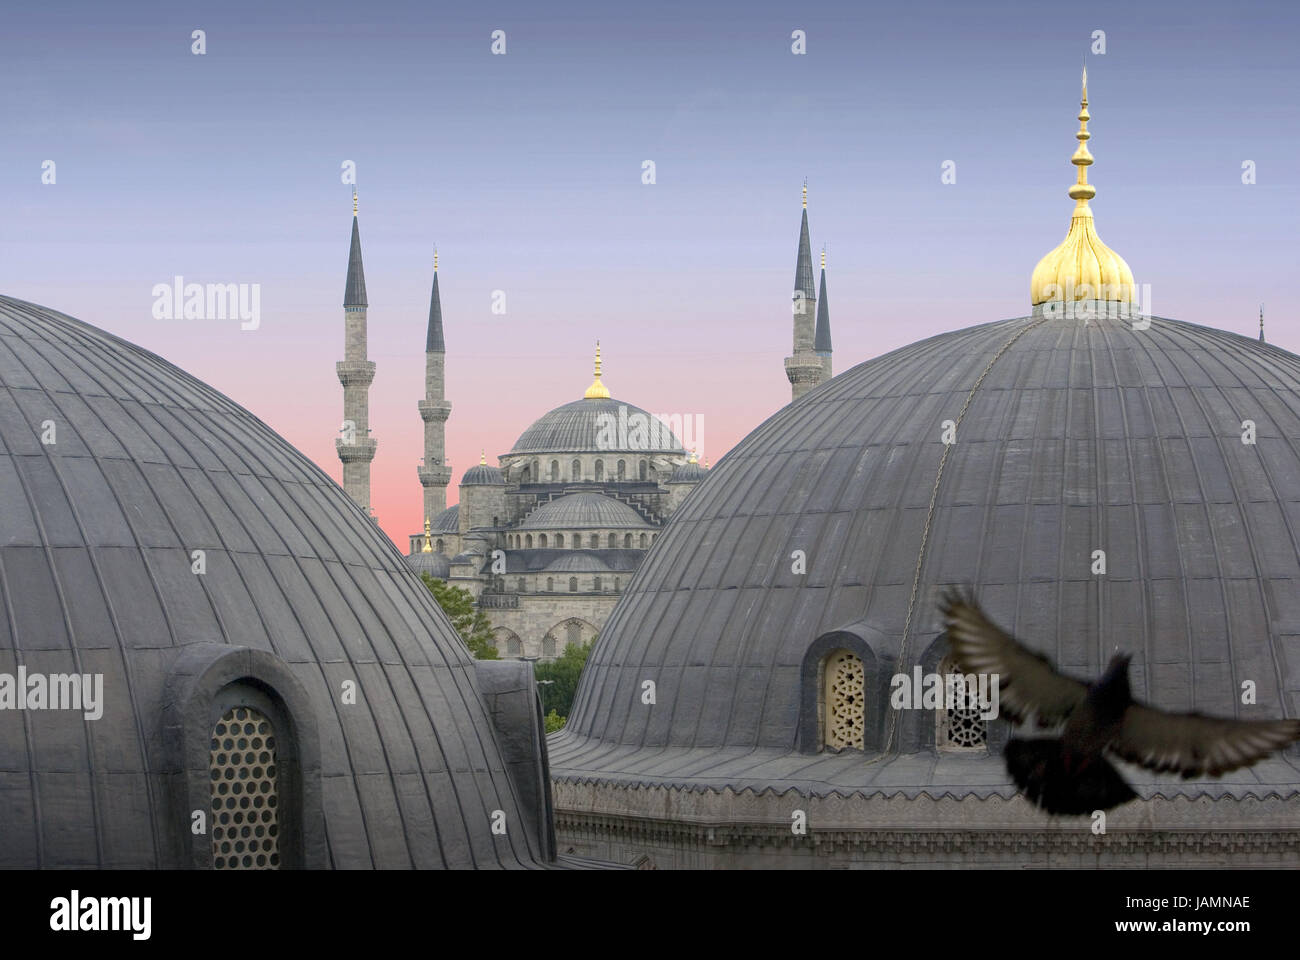 Turkey,Istanbul,Hagia Sophia,Ayasofya museum,domes,detail,town,city,metropolis,culture,tourism,place of interest,structure,architecture,landmark,historically,UNESCO-world cultural heritage,architecture,domed building way,pigeon,Vogel,fly,dusk, Stock Photo